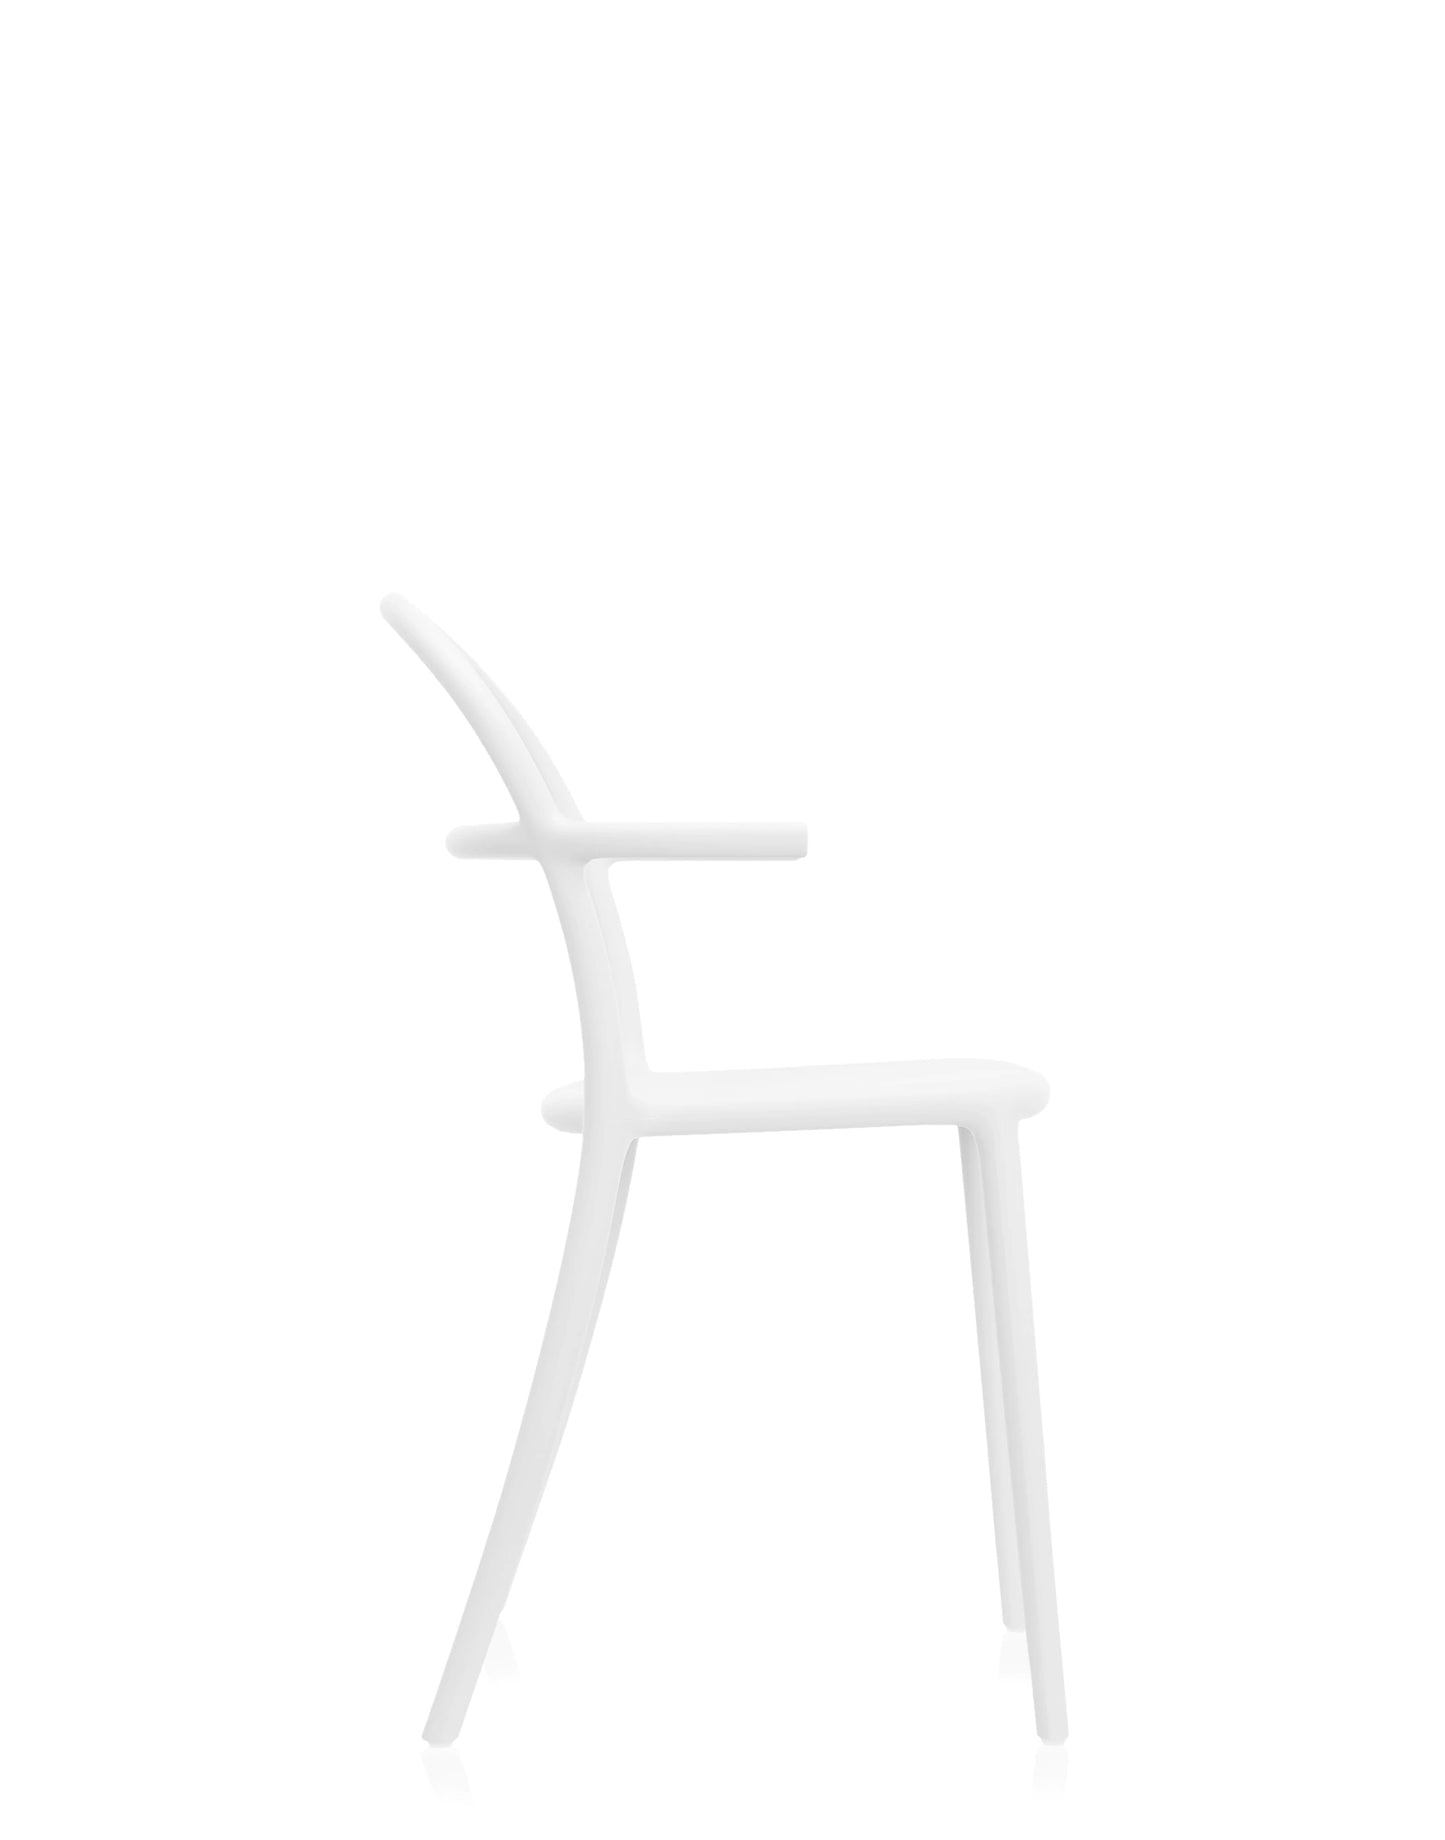 C Chair in White, Set of 2